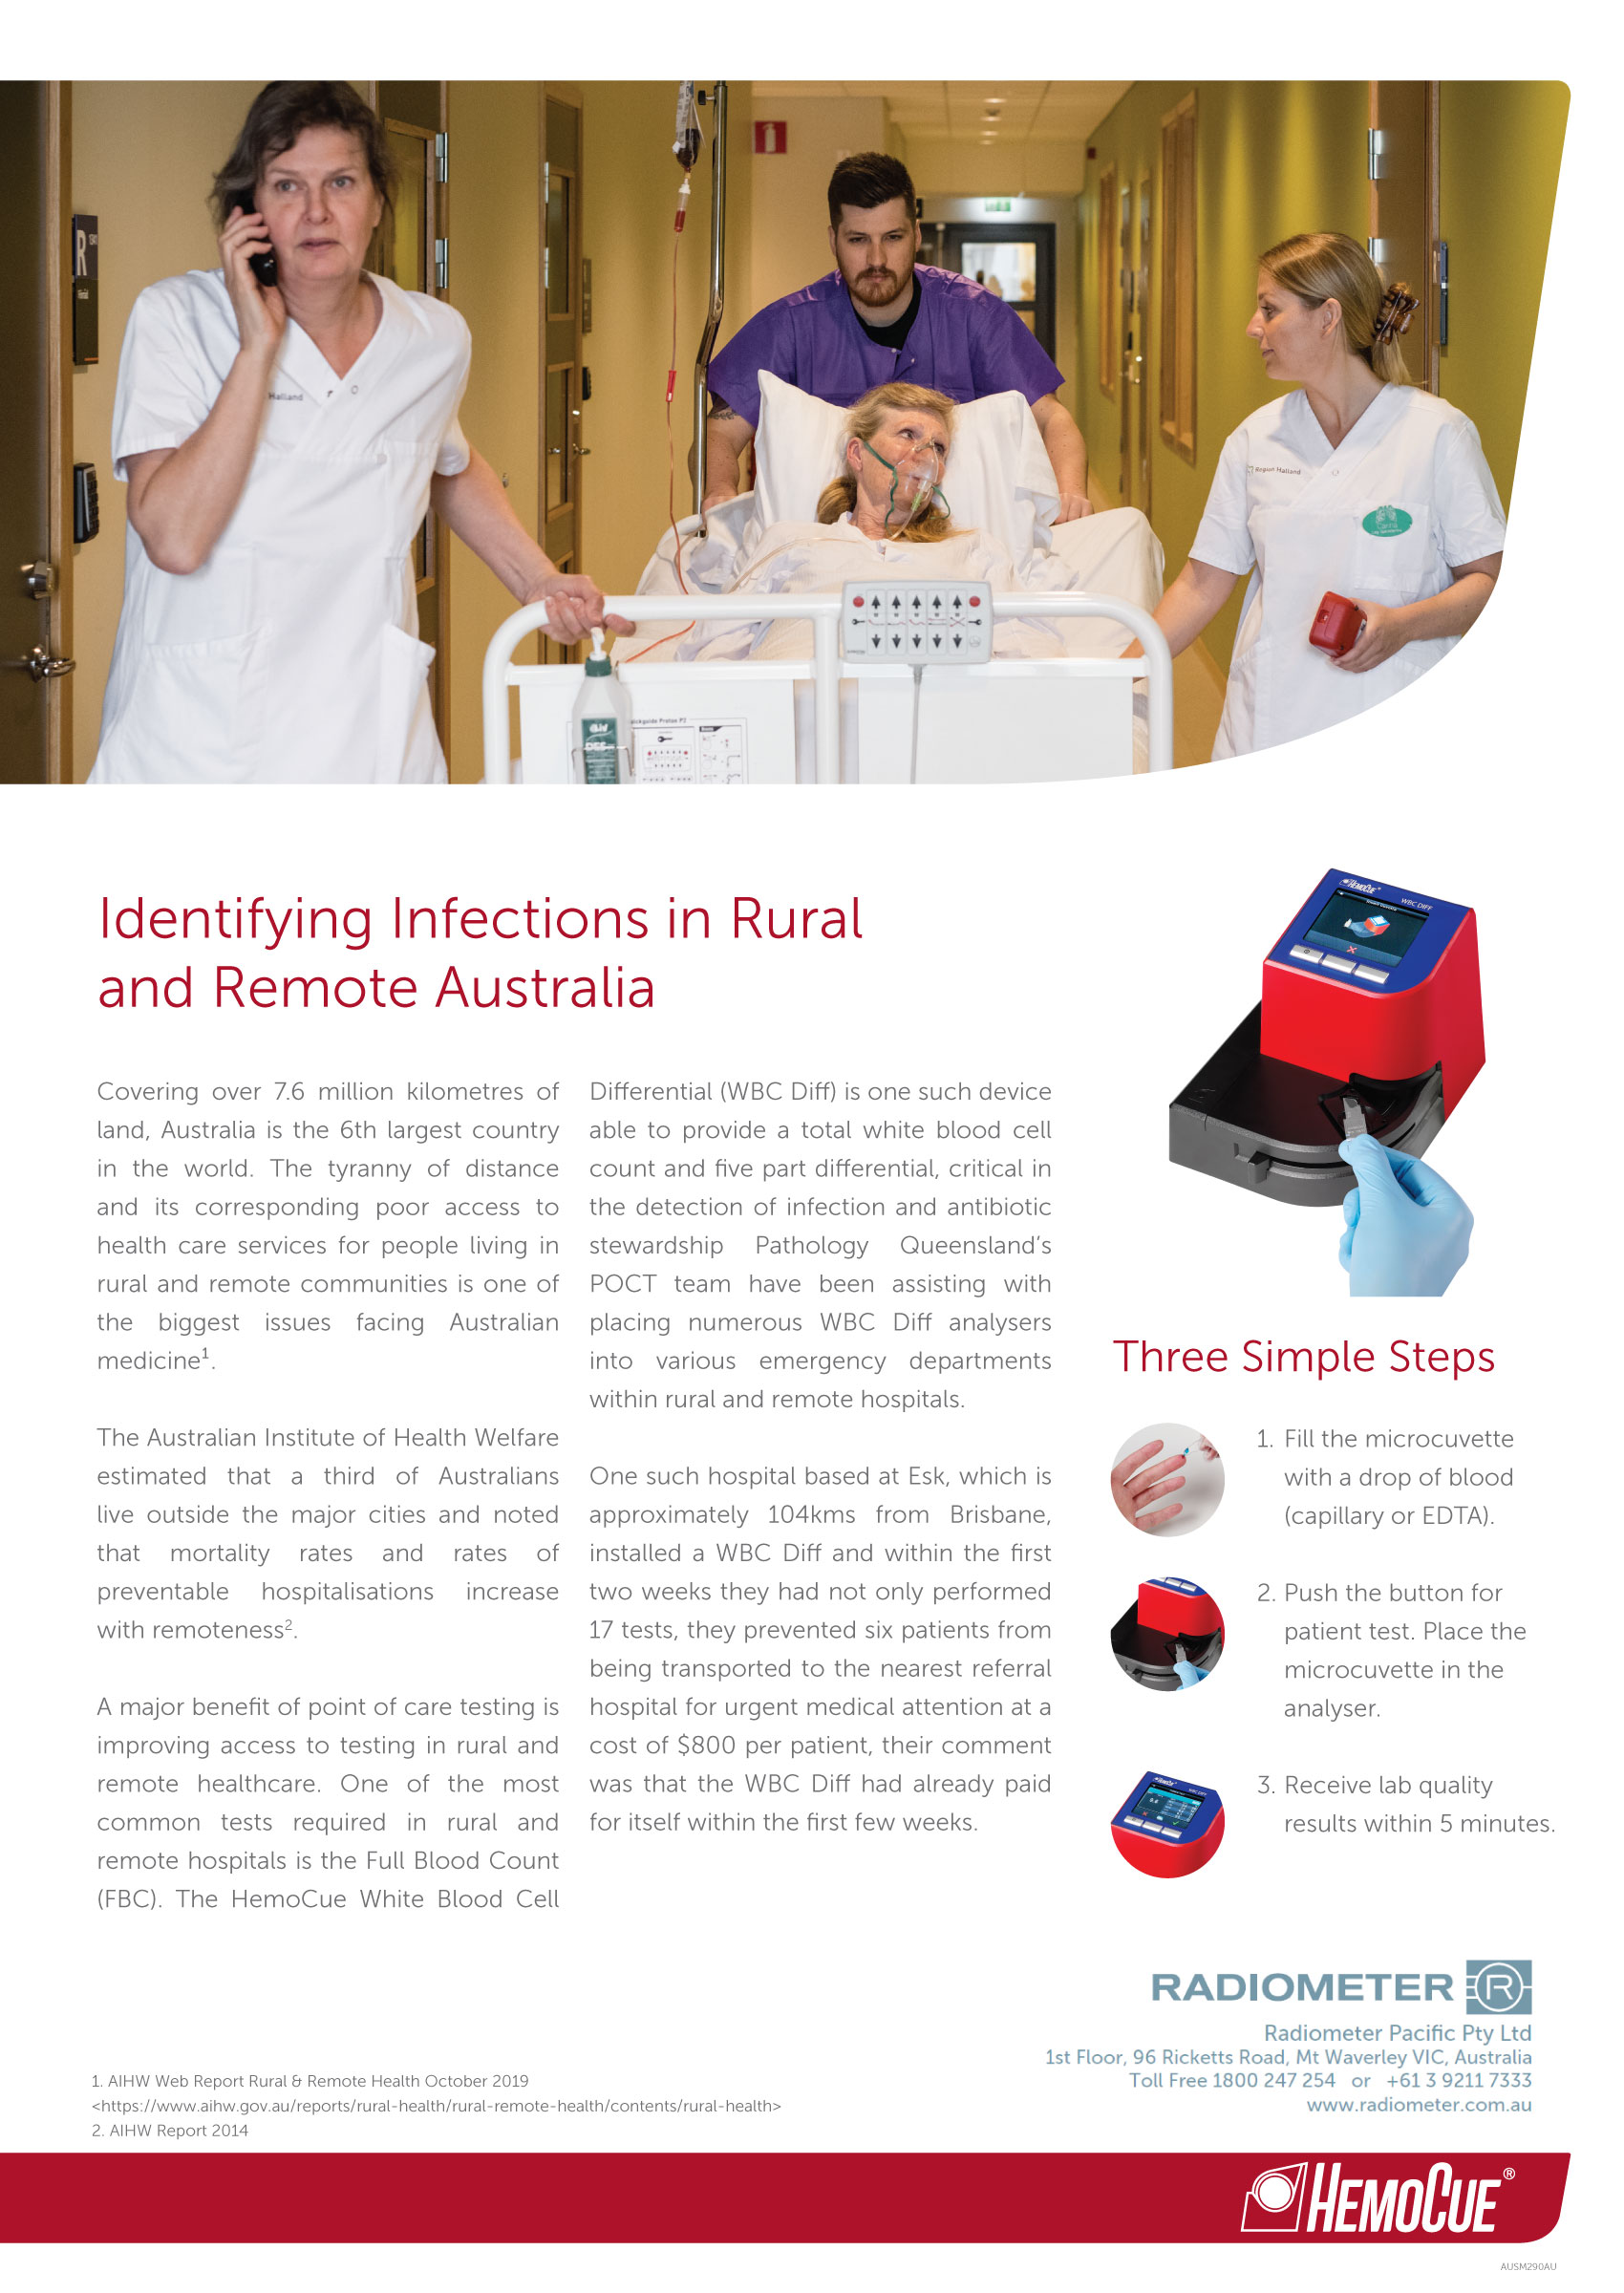 Identifying Infections in Rural and Remote Australia 1. AIHW Web Report Rural & Remote Health October 2019 <https://www.aihw.gov.au/reports/rural-health/rural-remote-health/contents/rural-health> 2. AIHW Report 2014 Covering over 7.6 million kilometres of land, Australia is the 6th largest country in the world. The tyranny of distance and its corresponding poor access to health care services for people living in rural and remote communities is one of the biggest issues facing Australian medicine¹.